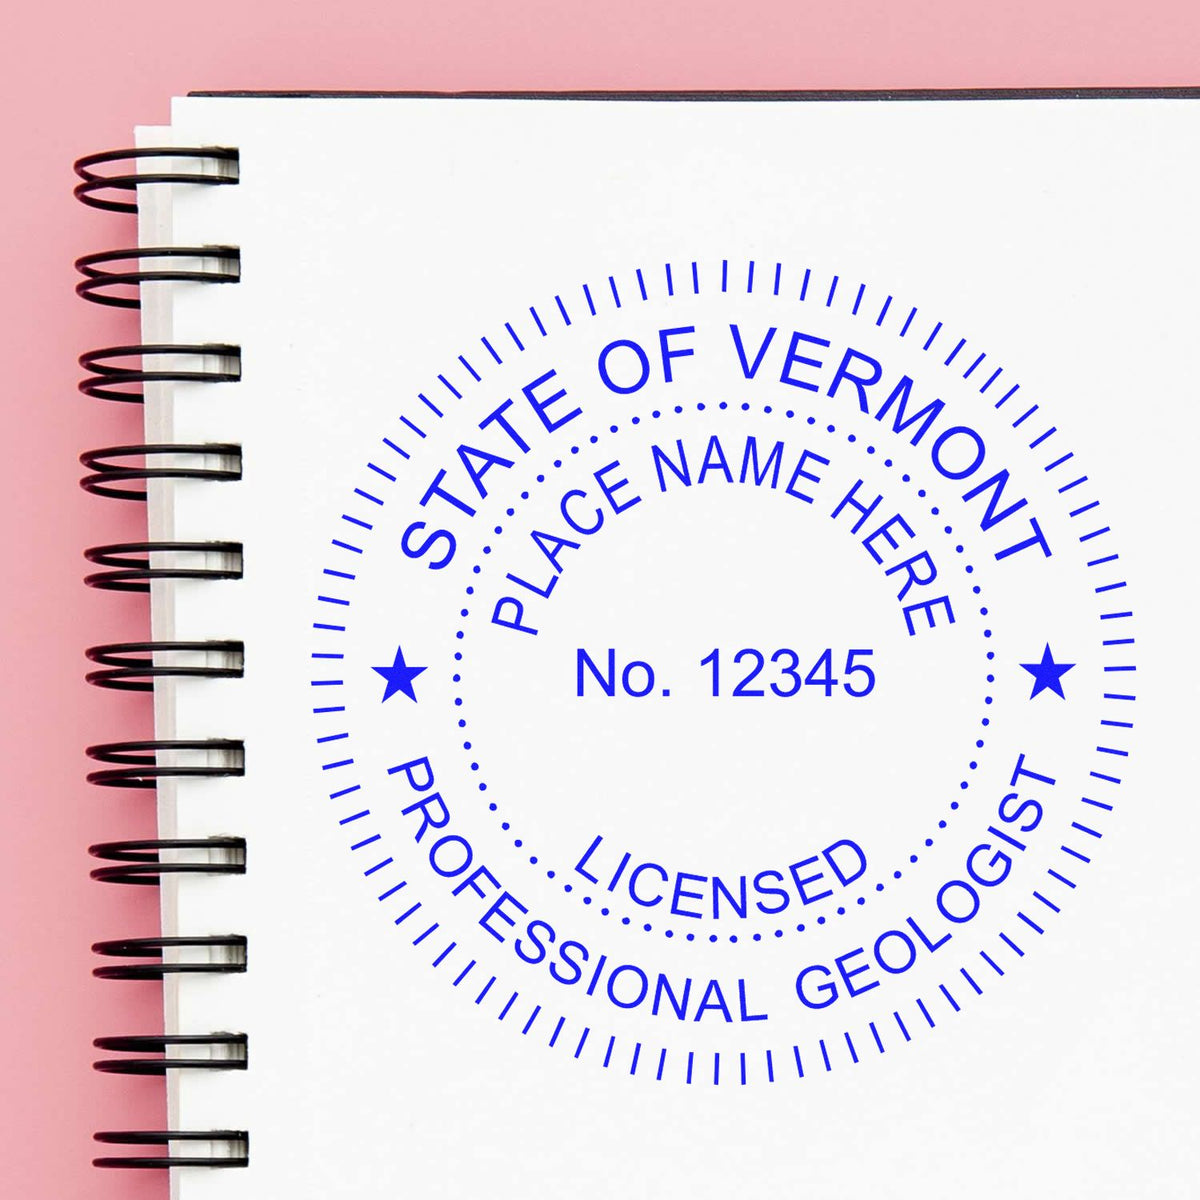 An alternative view of the Slim Pre-Inked Vermont Professional Geologist Seal Stamp stamped on a sheet of paper showing the image in use